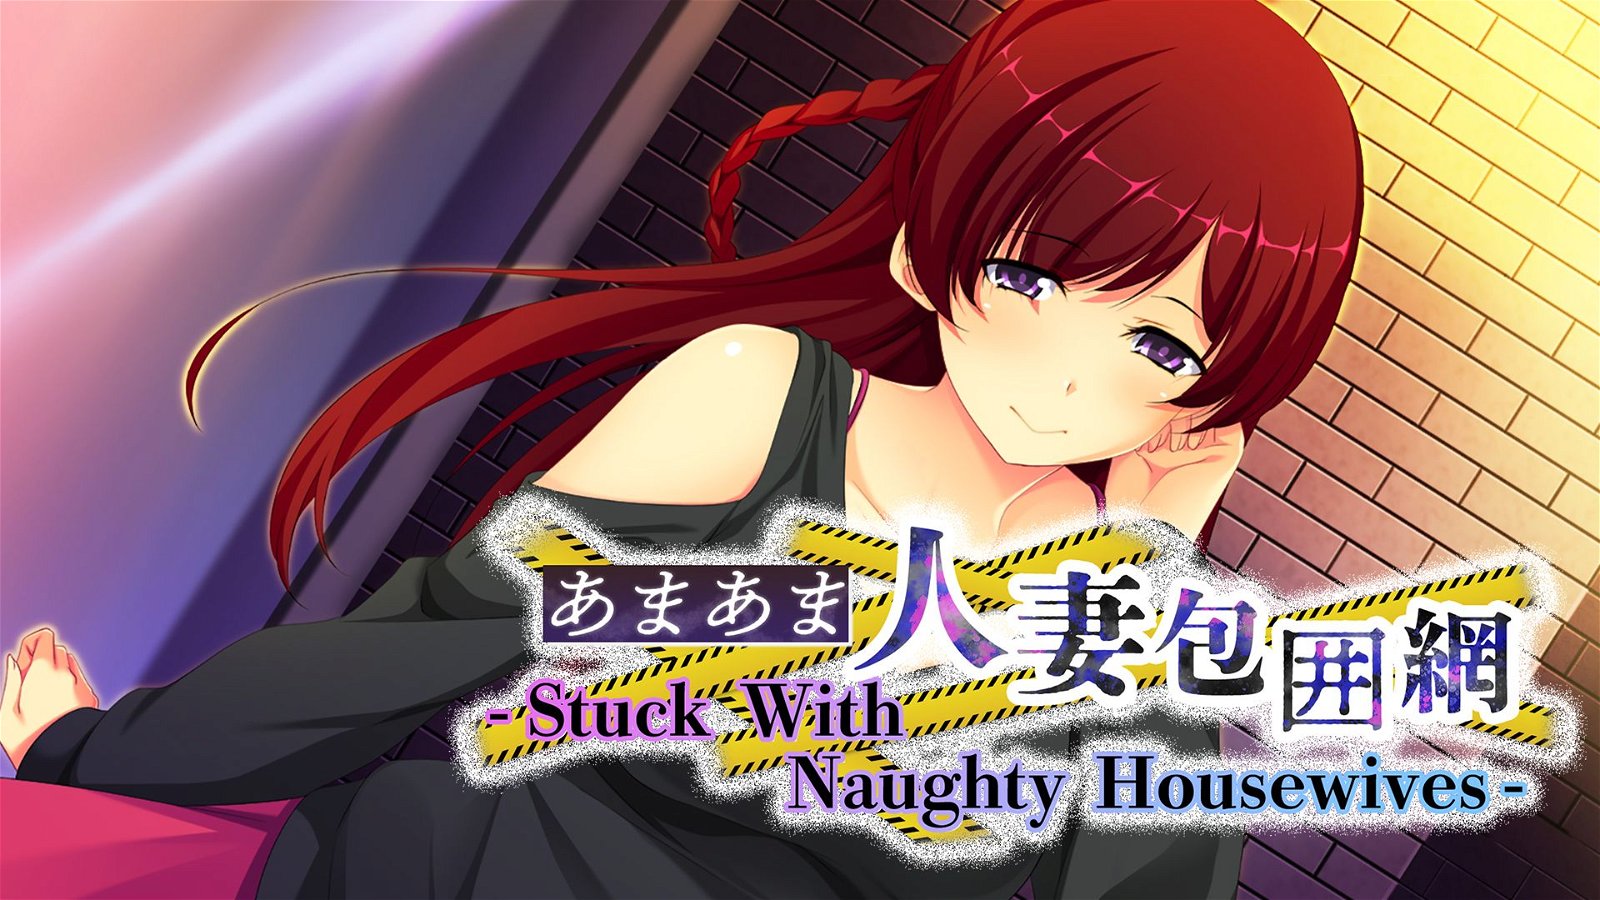 Image of - Stuck With Naughty Housewives - あまあま人妻包囲網